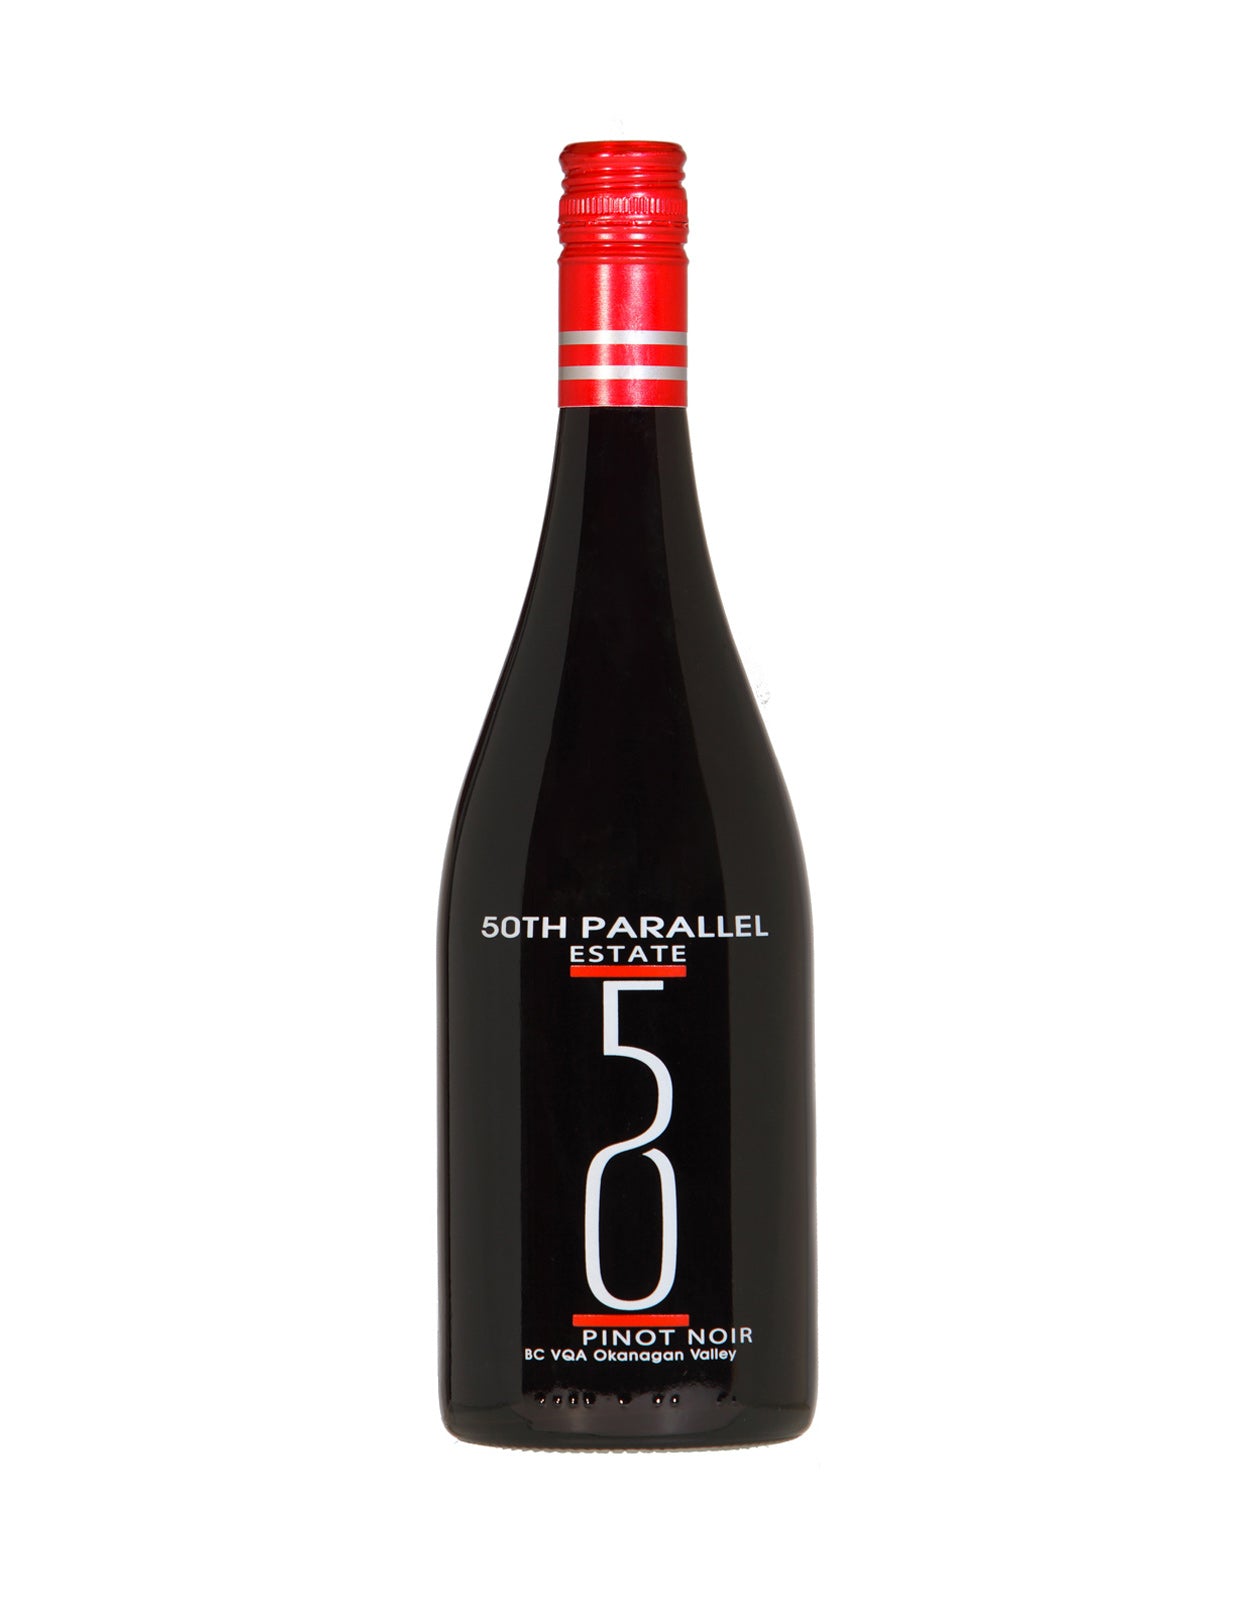 50th Parallel Pinot Noir 2021